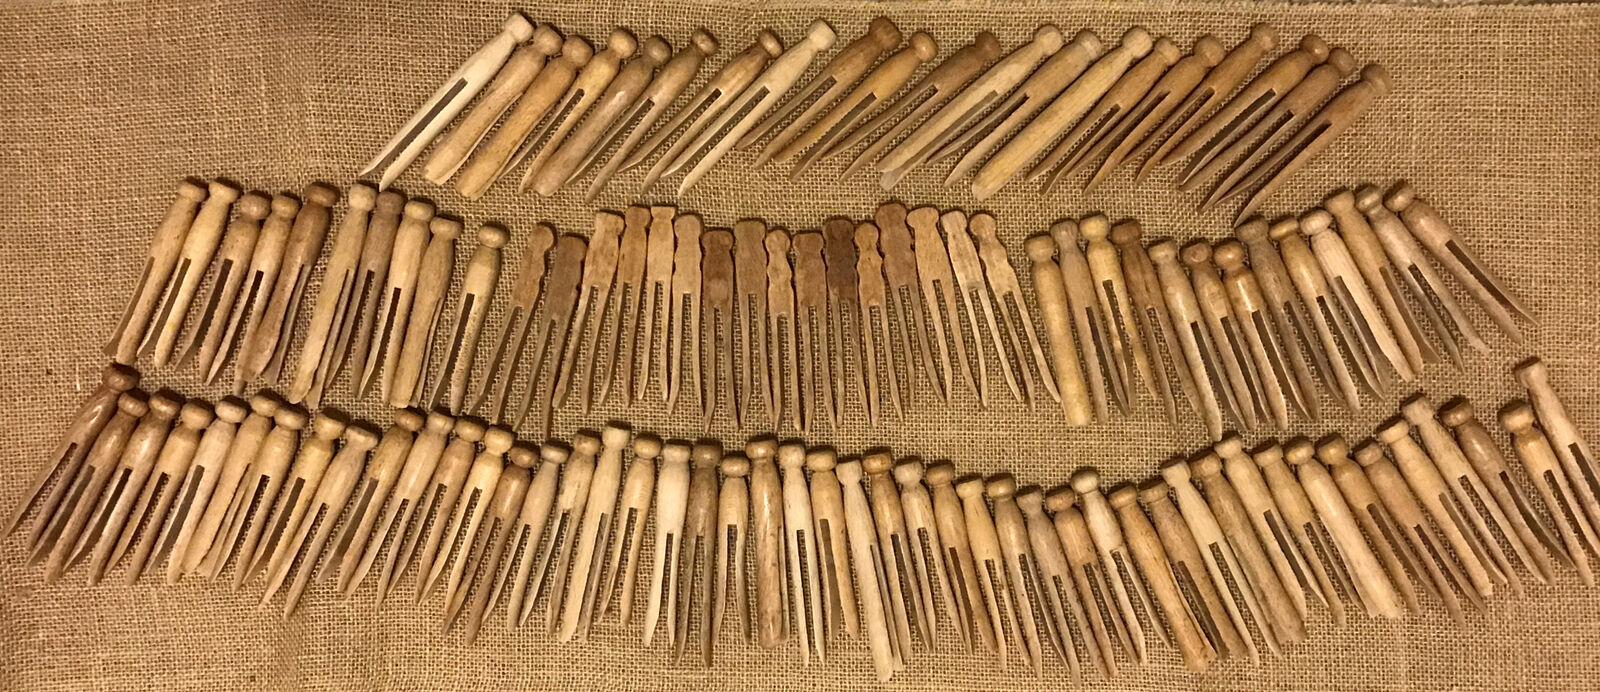 Vintage Lot Of 105 Wood Wooden Clothes Pins Clothespins 1950's - 1970’s